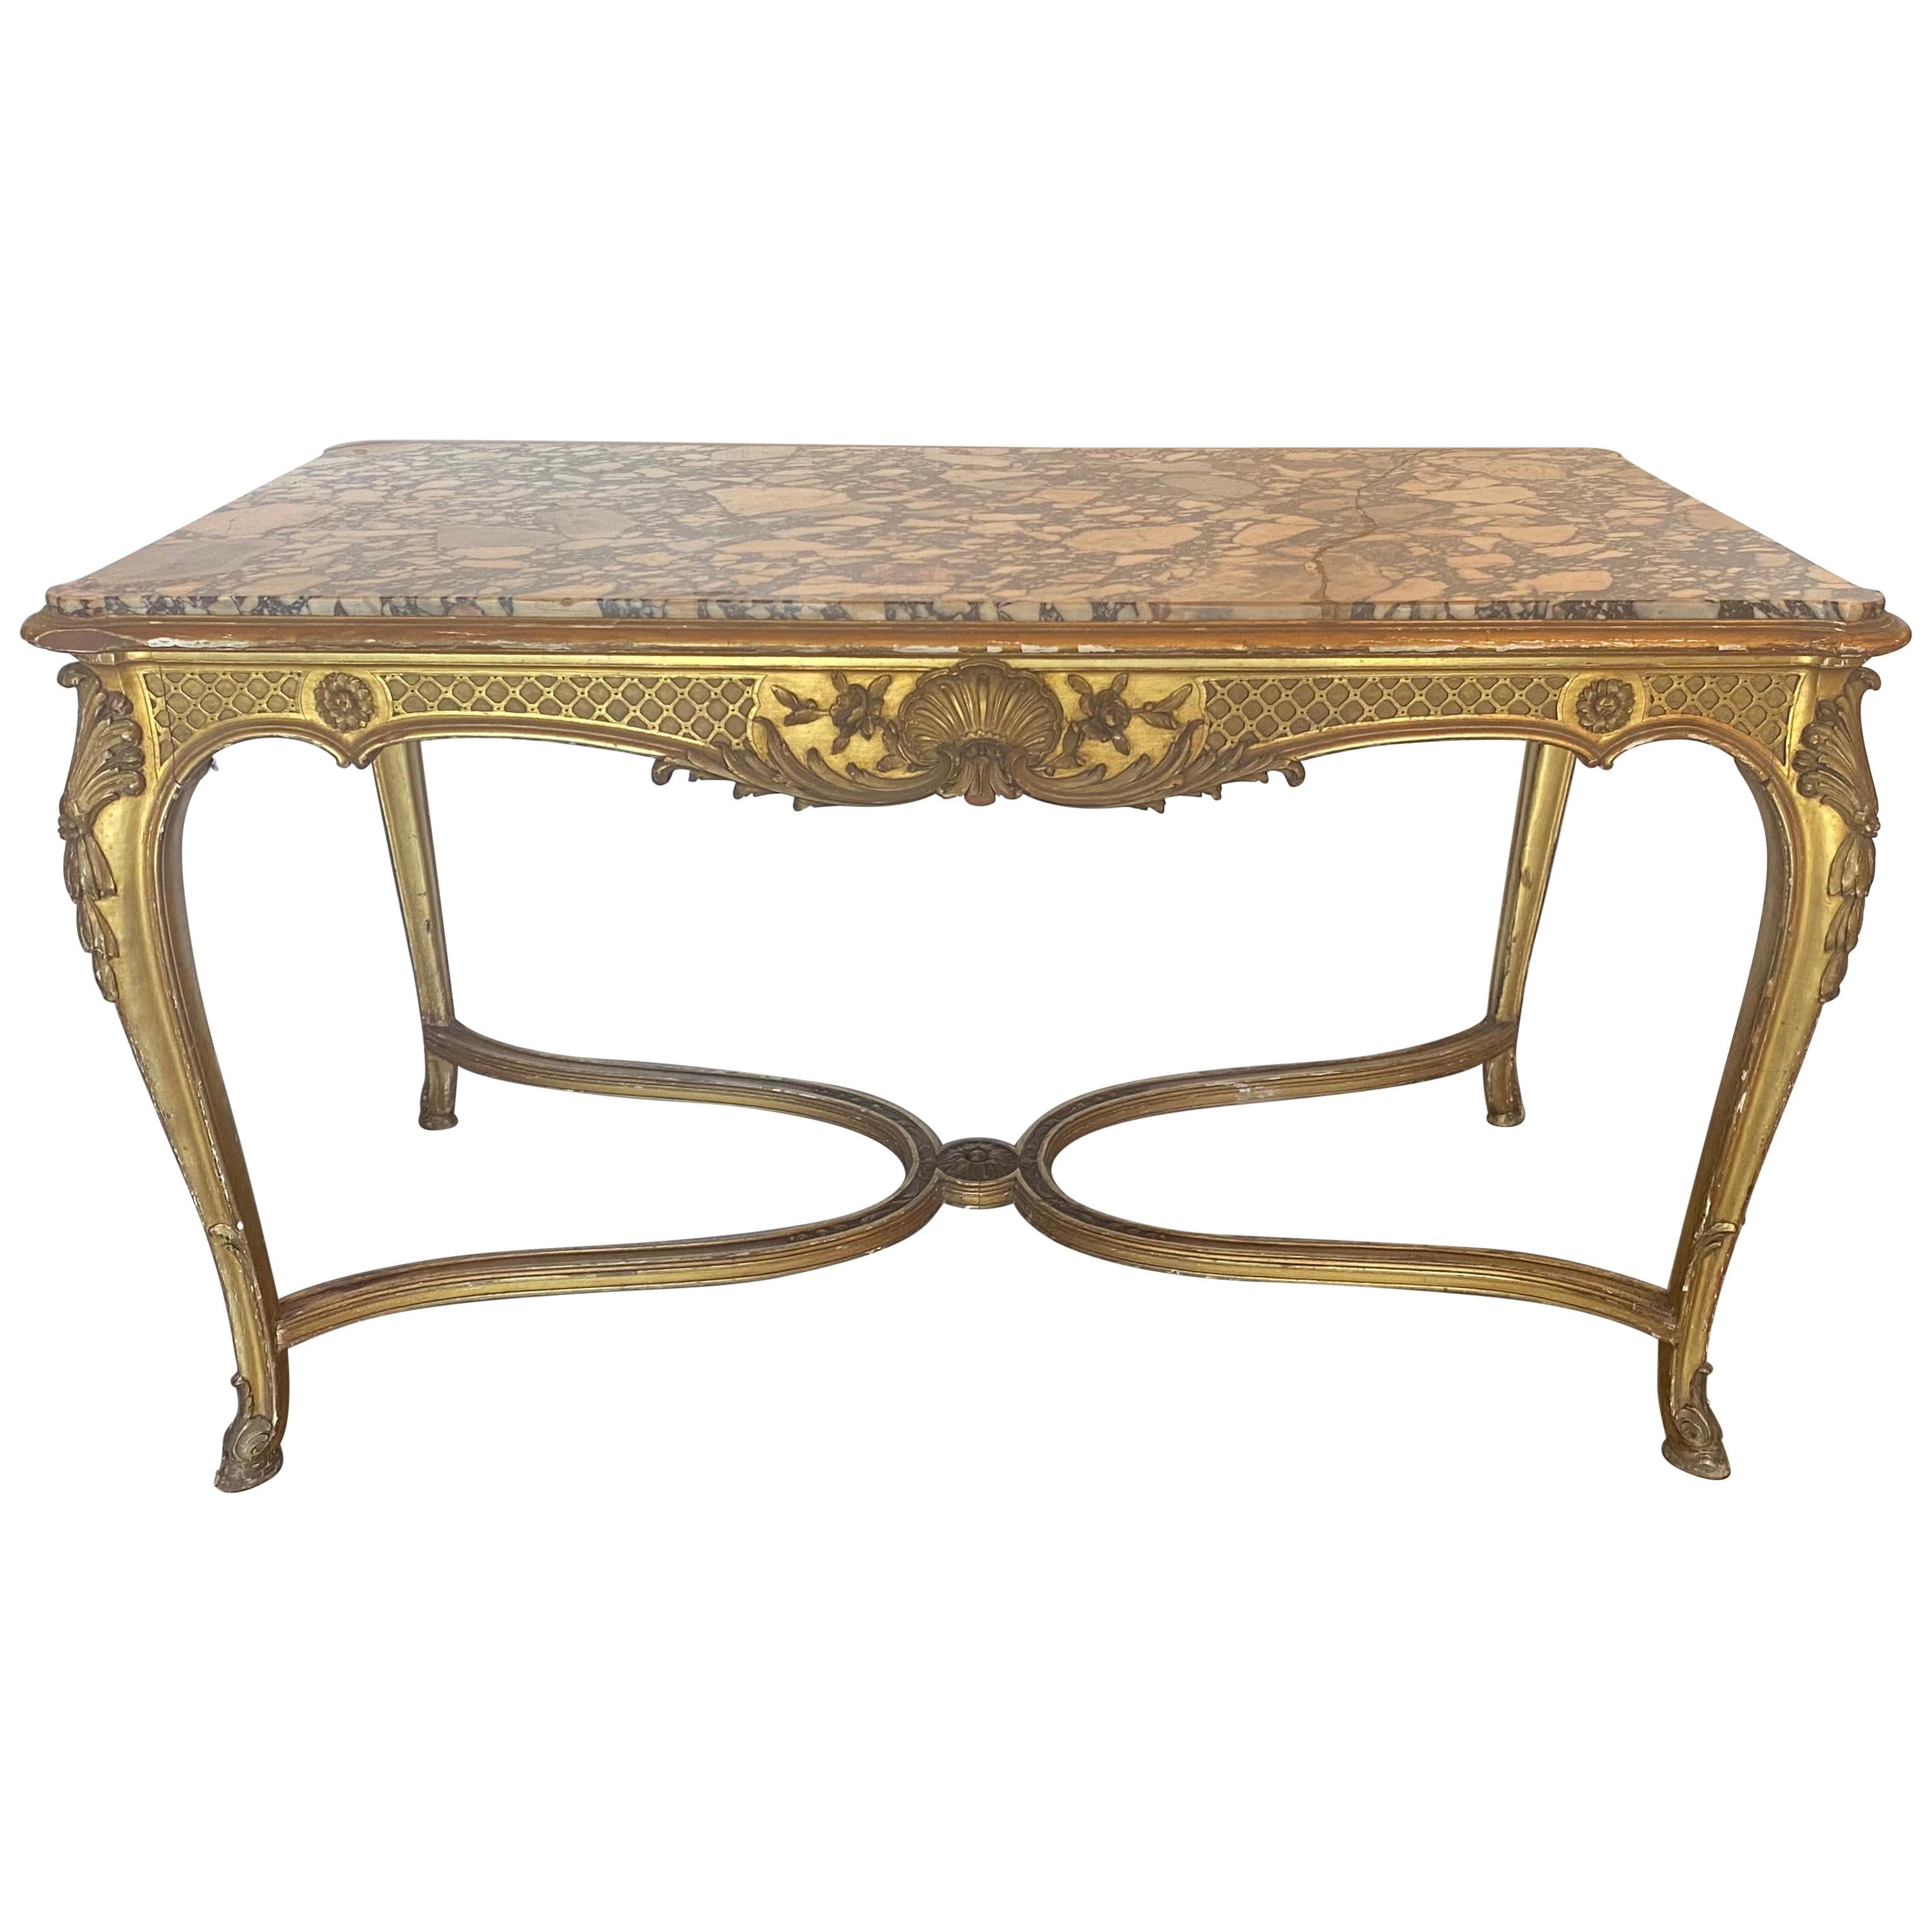 Exceptional Louis XV Style Marble-Top Gilt Table For Sale